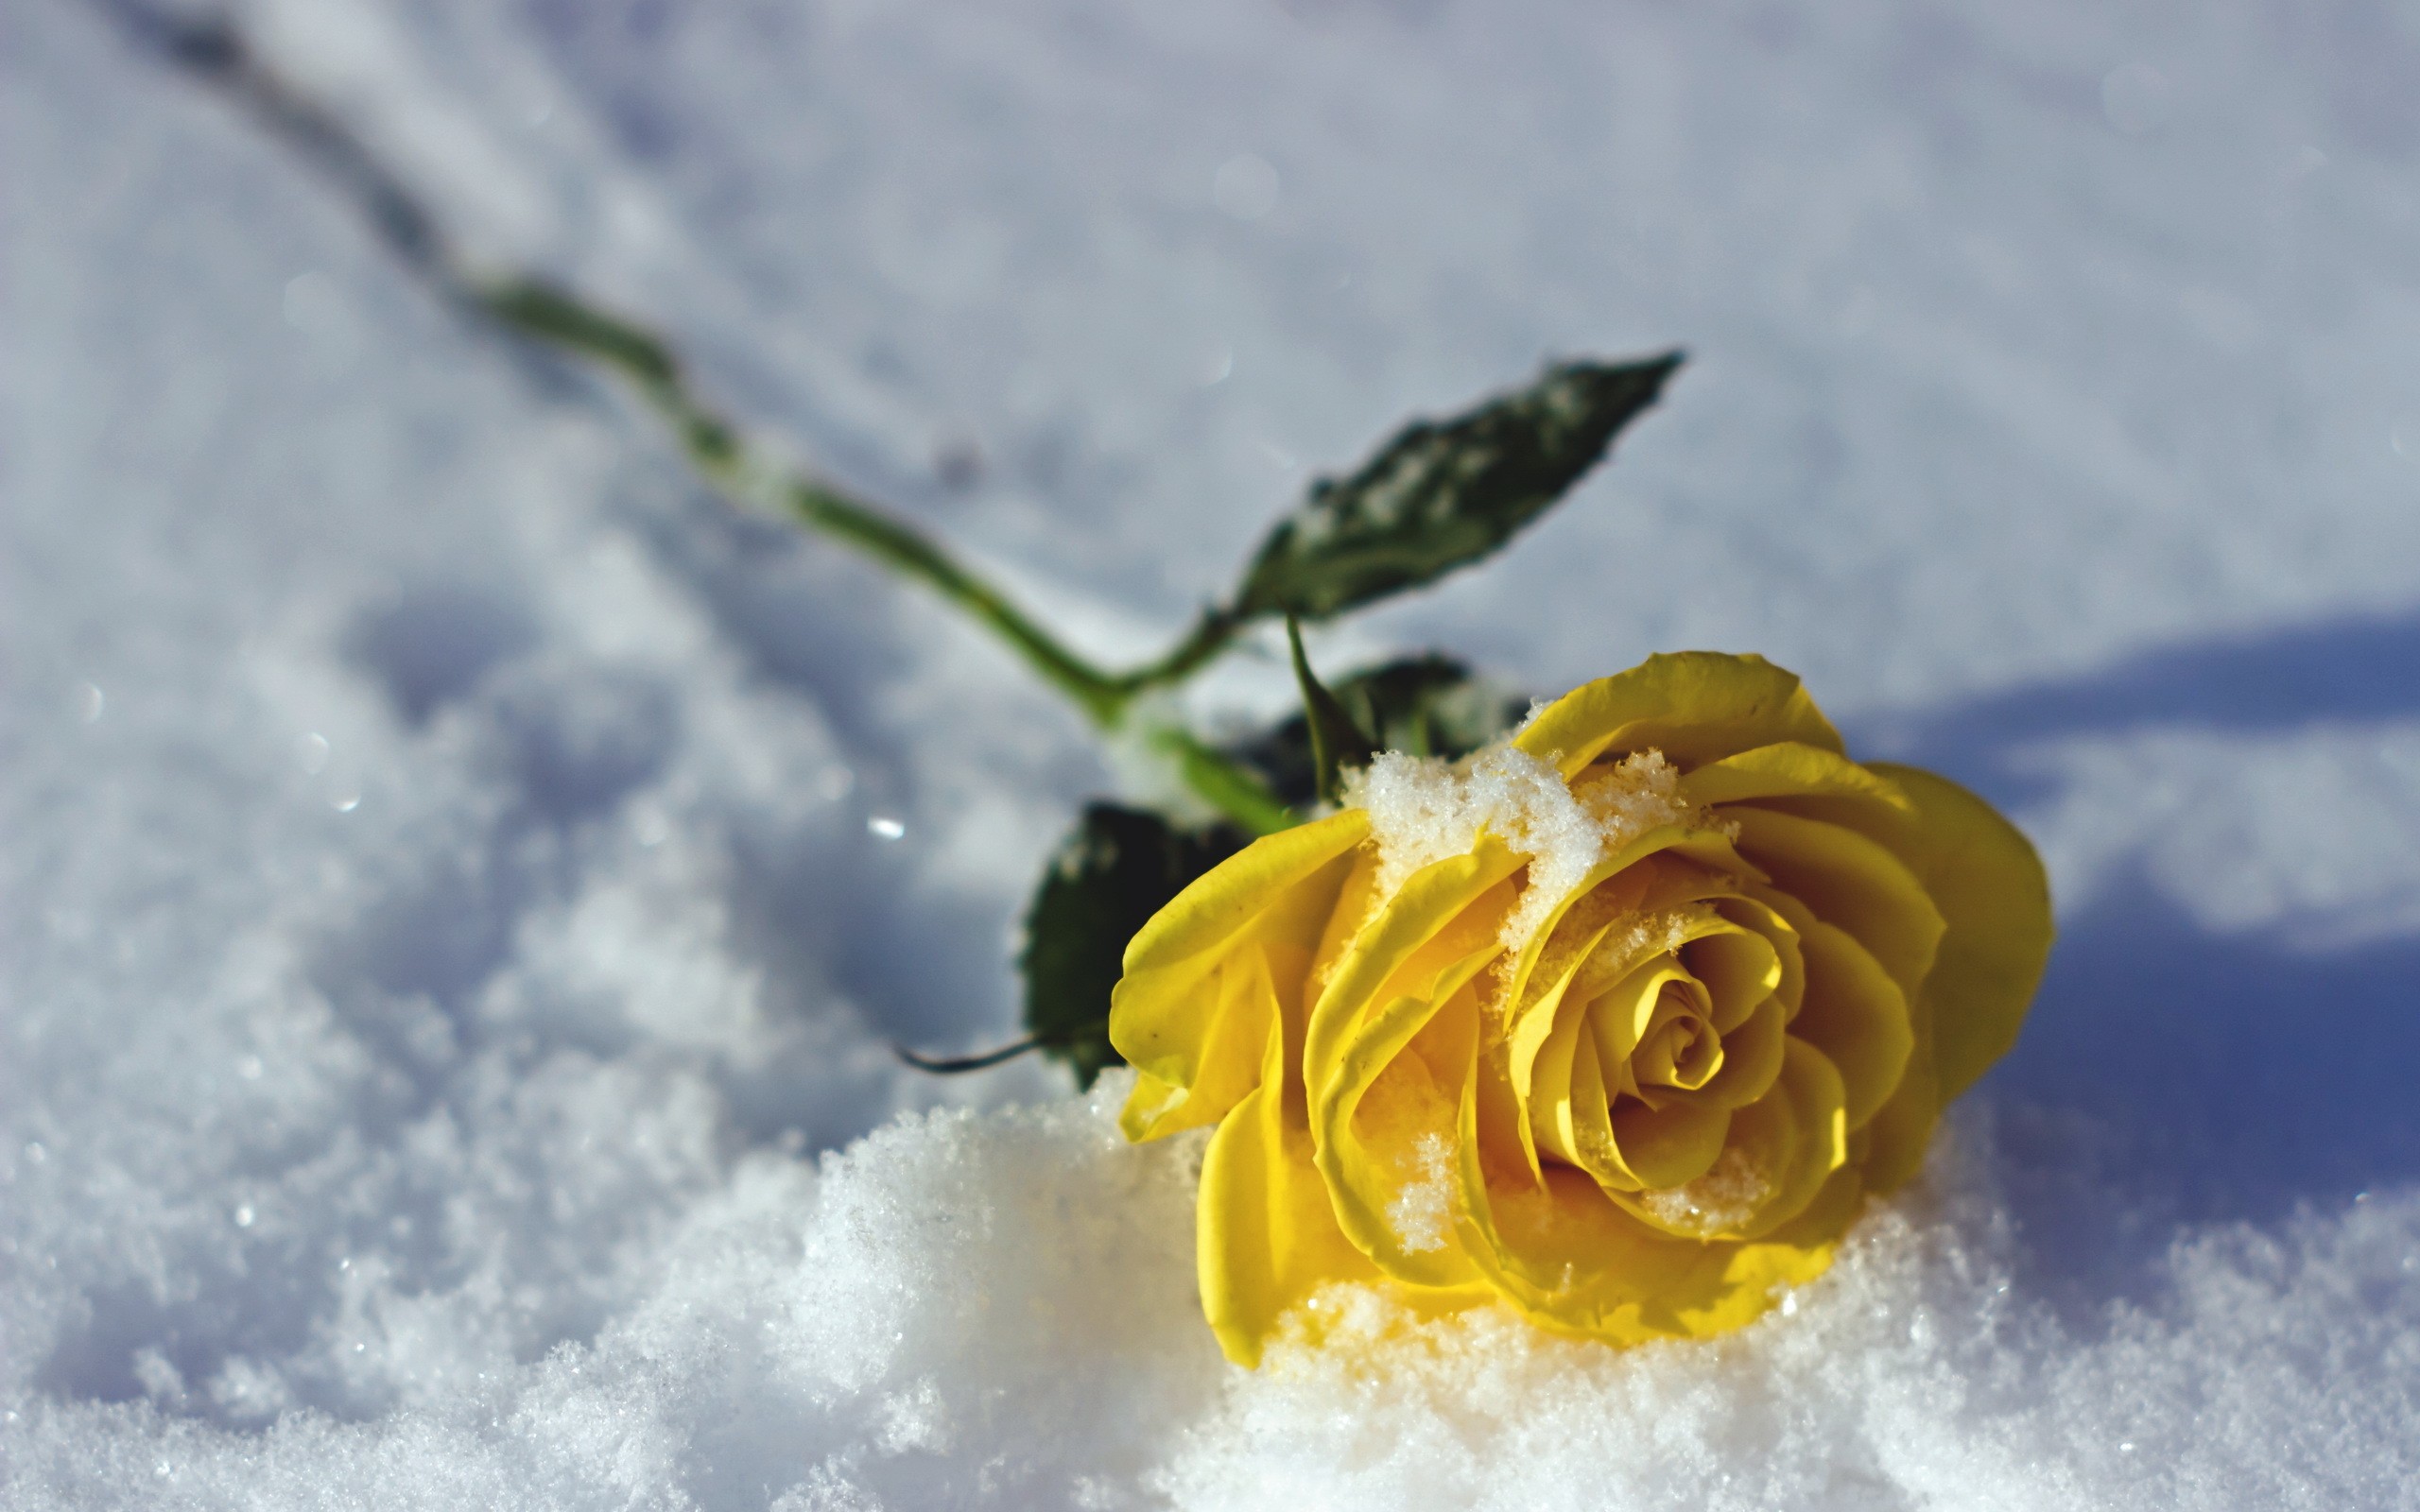 General 2560x1600 rose flowers snow yellow yellow flowers